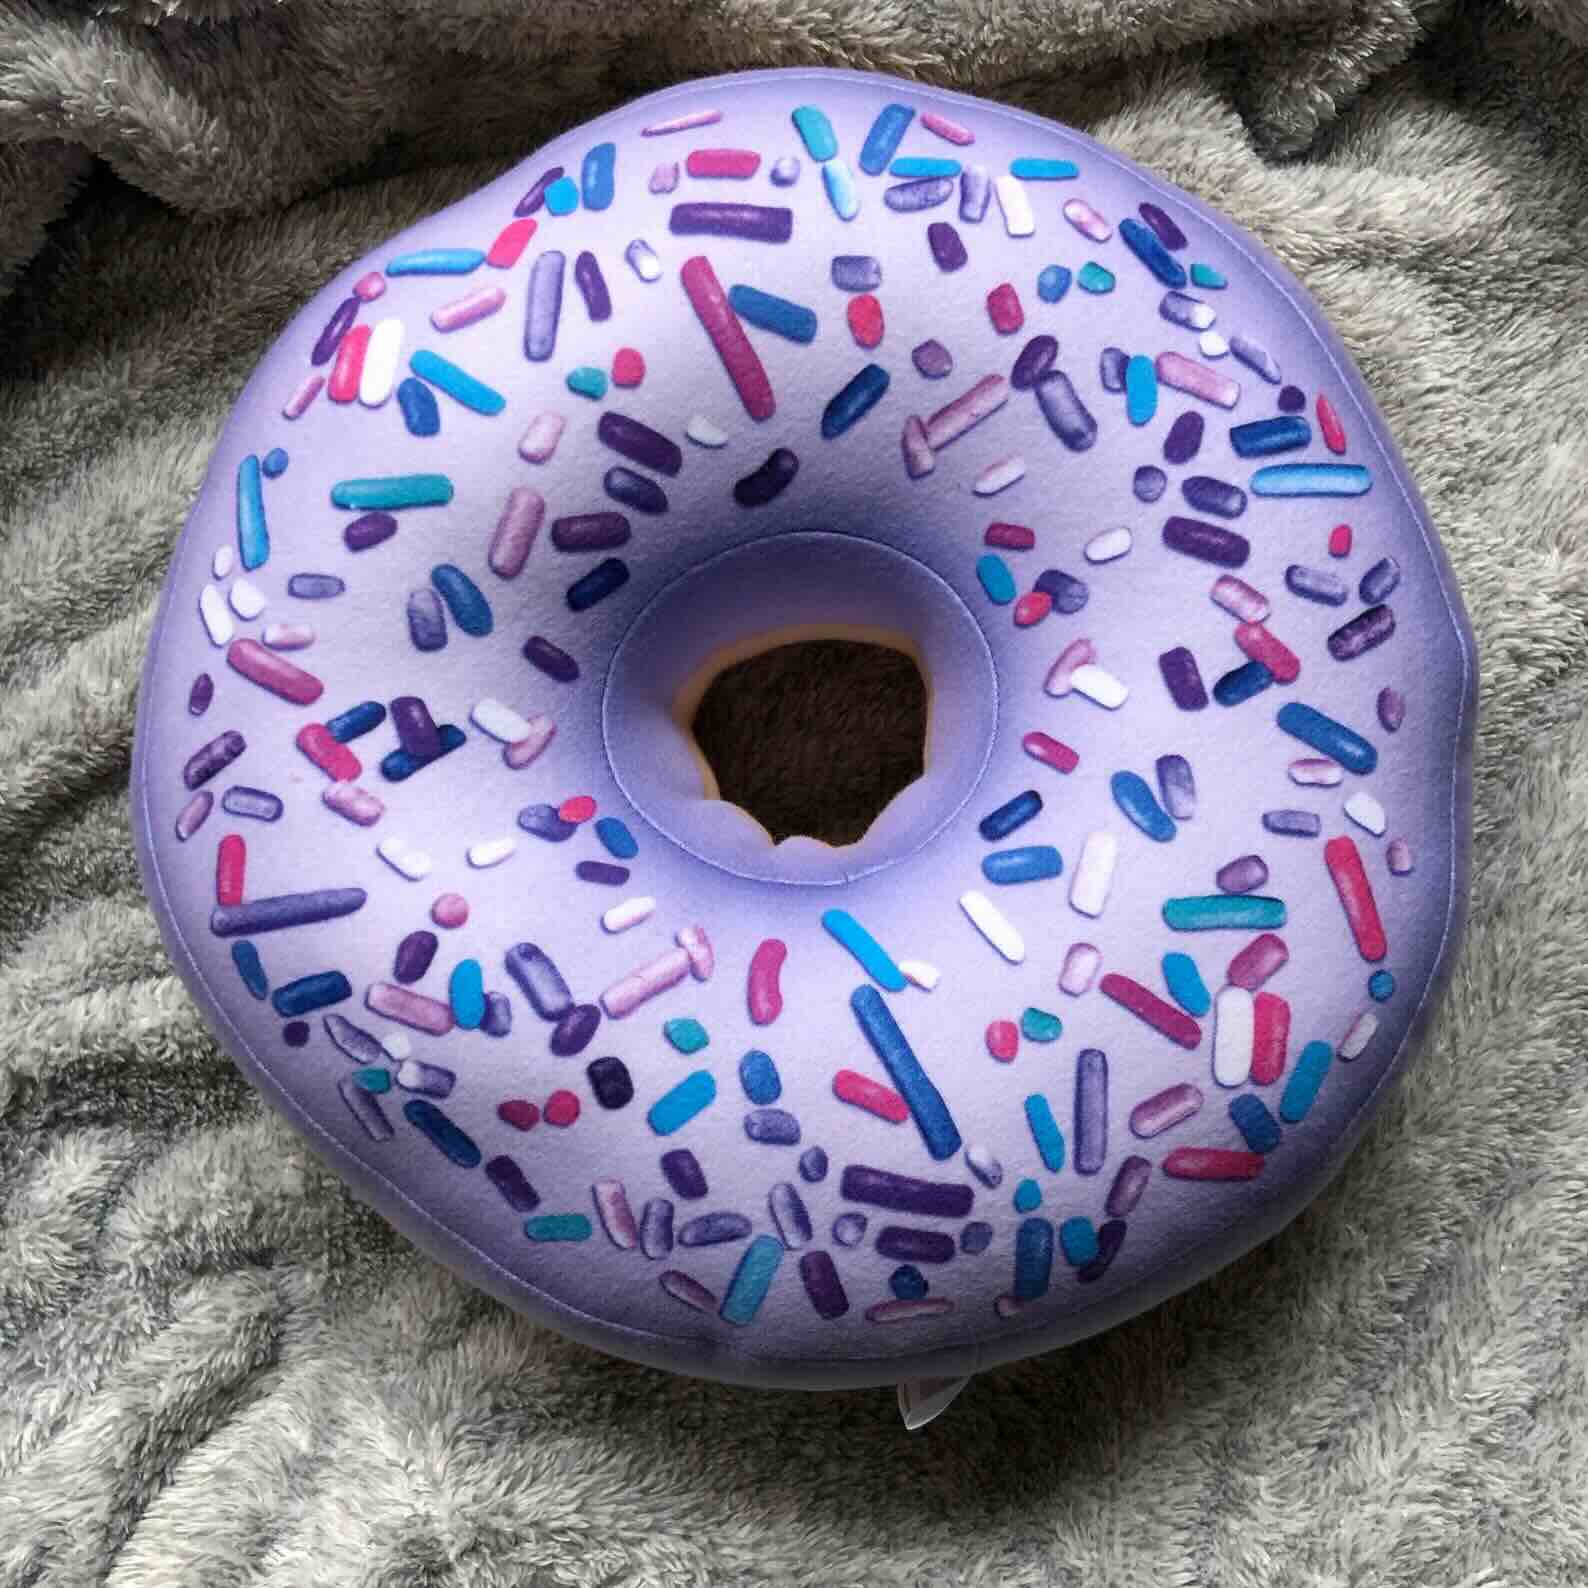 What Are Donut Cushions Used For